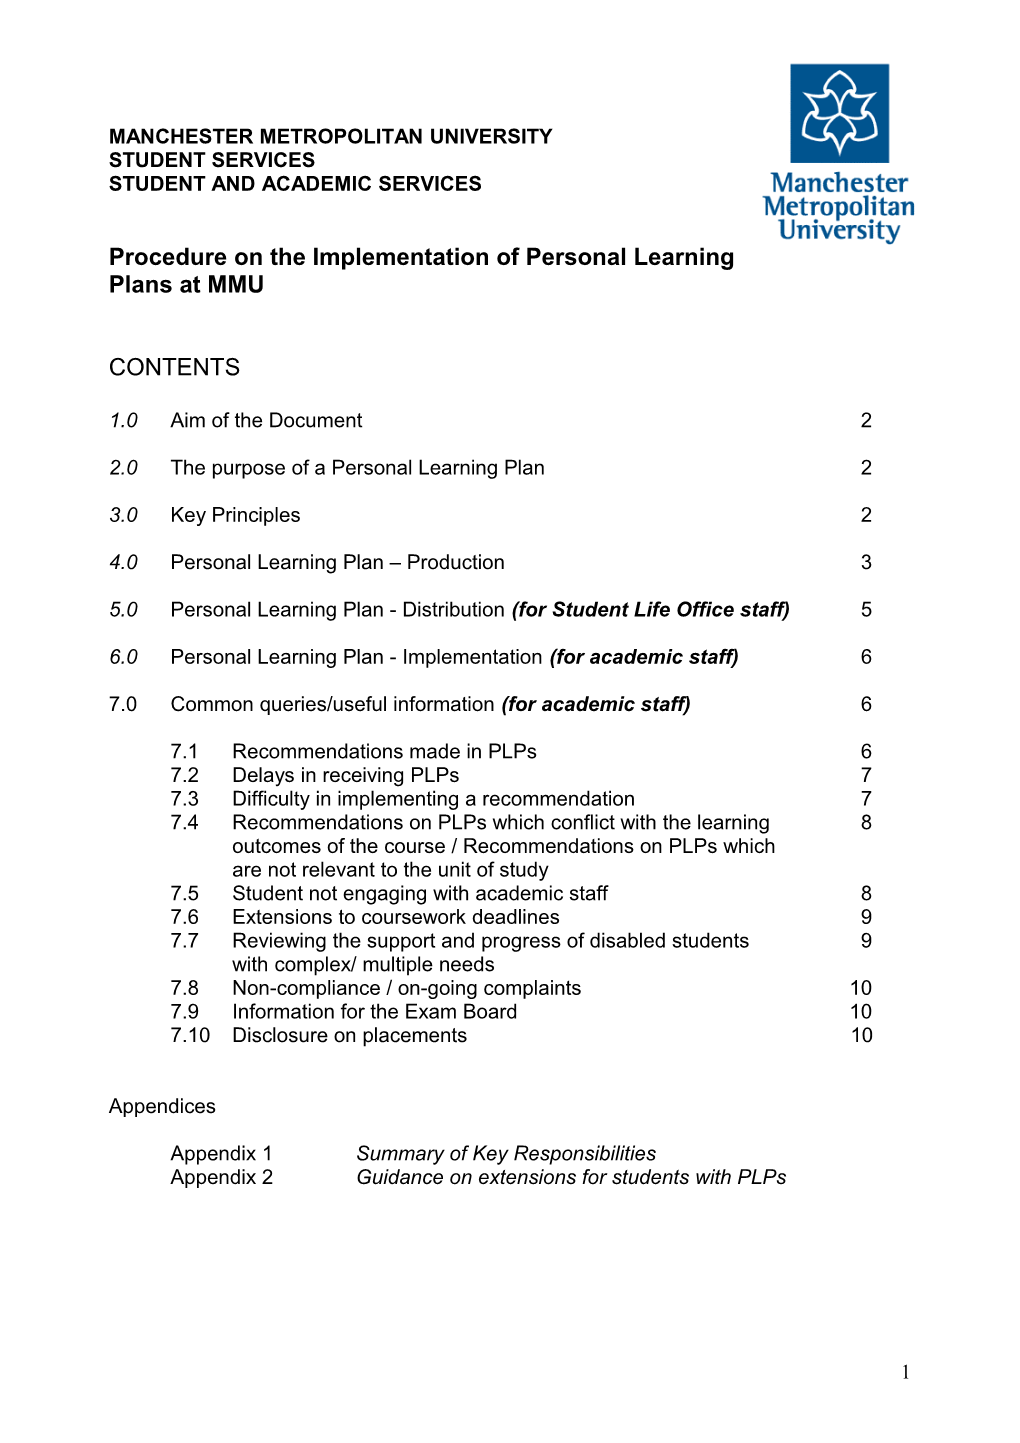 Guidelines for the Distribution and Implementation of Personal Learning Plans for Disabled